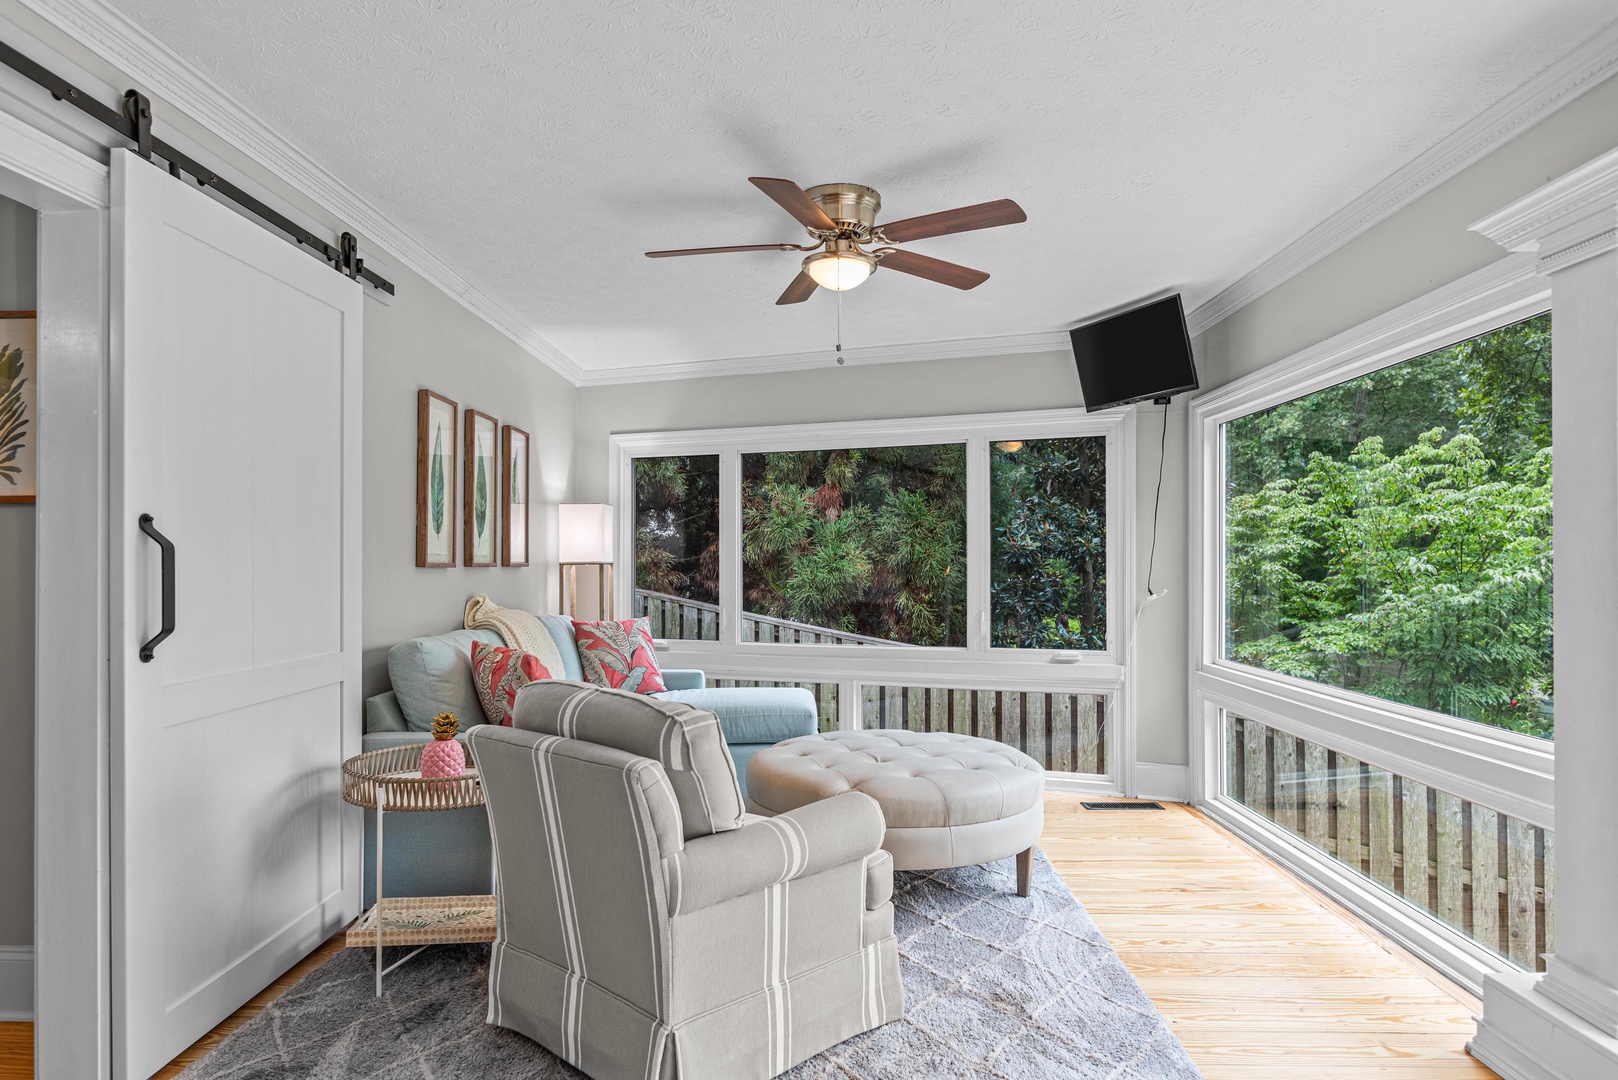 Unwind in the sunroom with lake views or enjoy a movie together